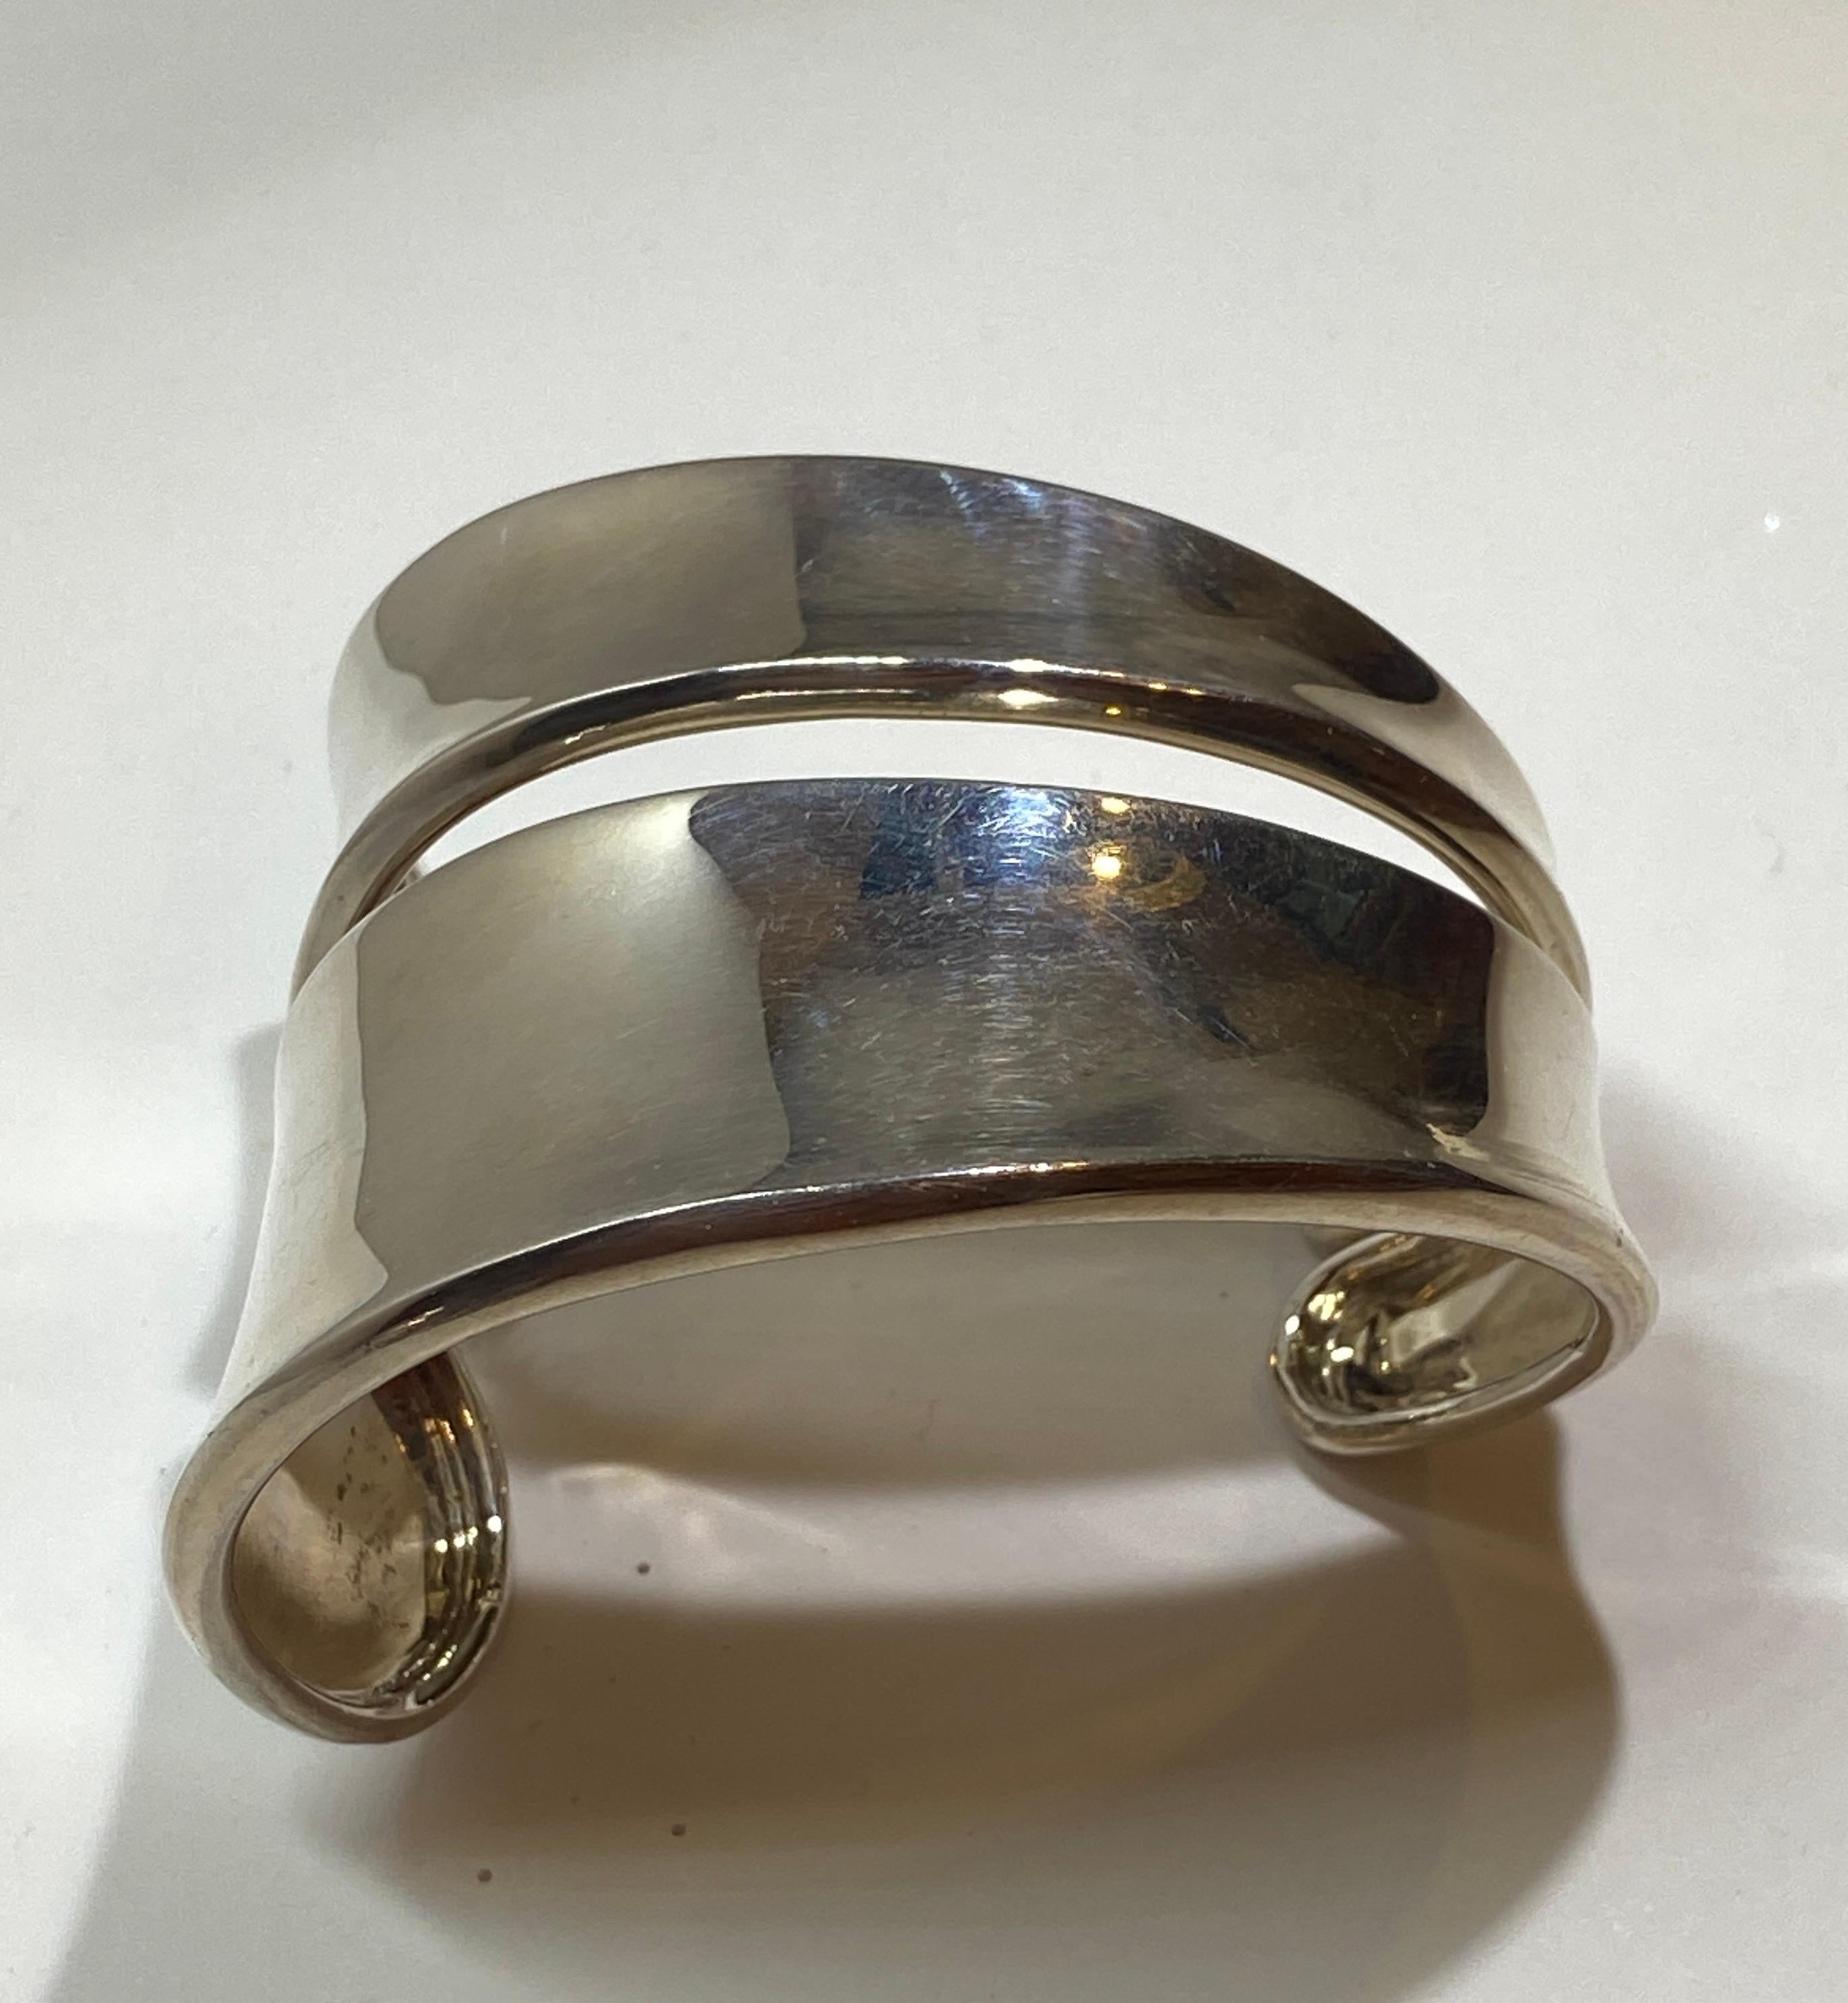 This wonderfully elegant three-dimensional Yvone Christa polished sterling silver cuff bracelet measures 7 1/8 in circumference. The width varies from 7/8 of an inch to 2 inches. Maker's mark is etched along the interior. Made in US.